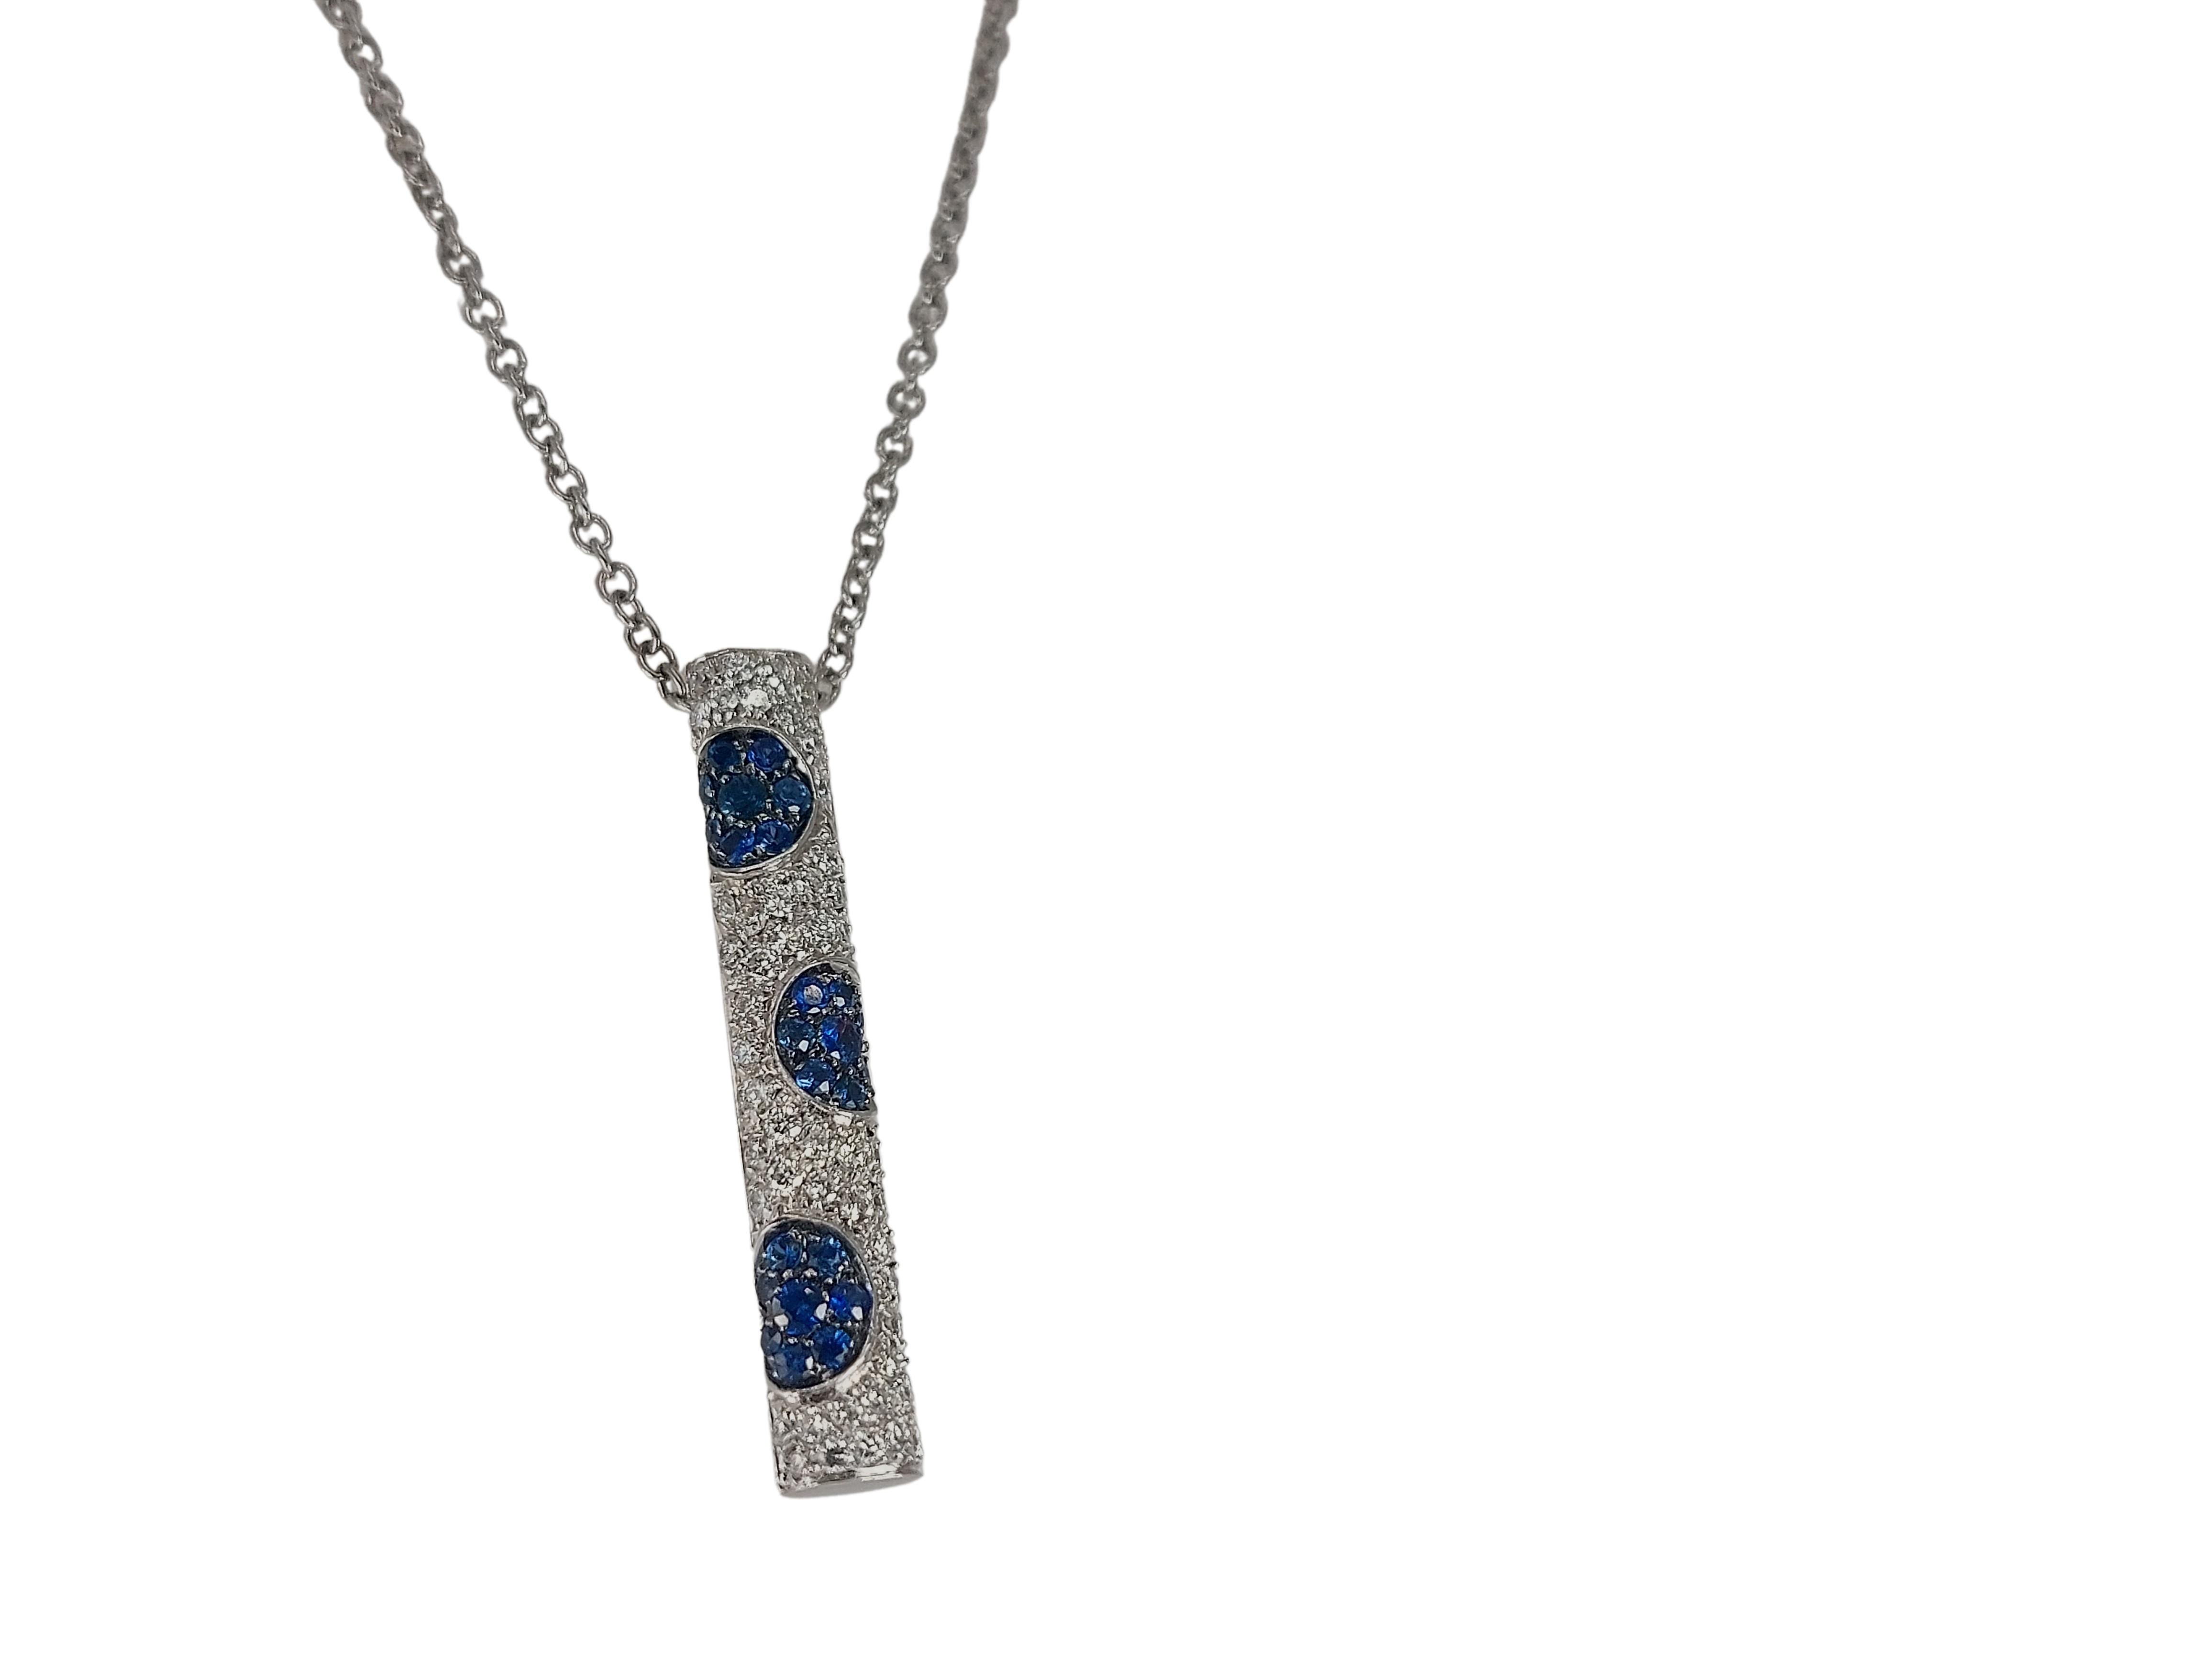 18kt White Gold Necklace With 1 ct Diamonds and 0.57ct Sapphires  

Can be purchased with matching Earrings as seen on photographs. 

Material: 18 kt white gold

Diamonds: Brilliant cut white diamonds together approx. 1ct

Sapphire: Blue sapphires